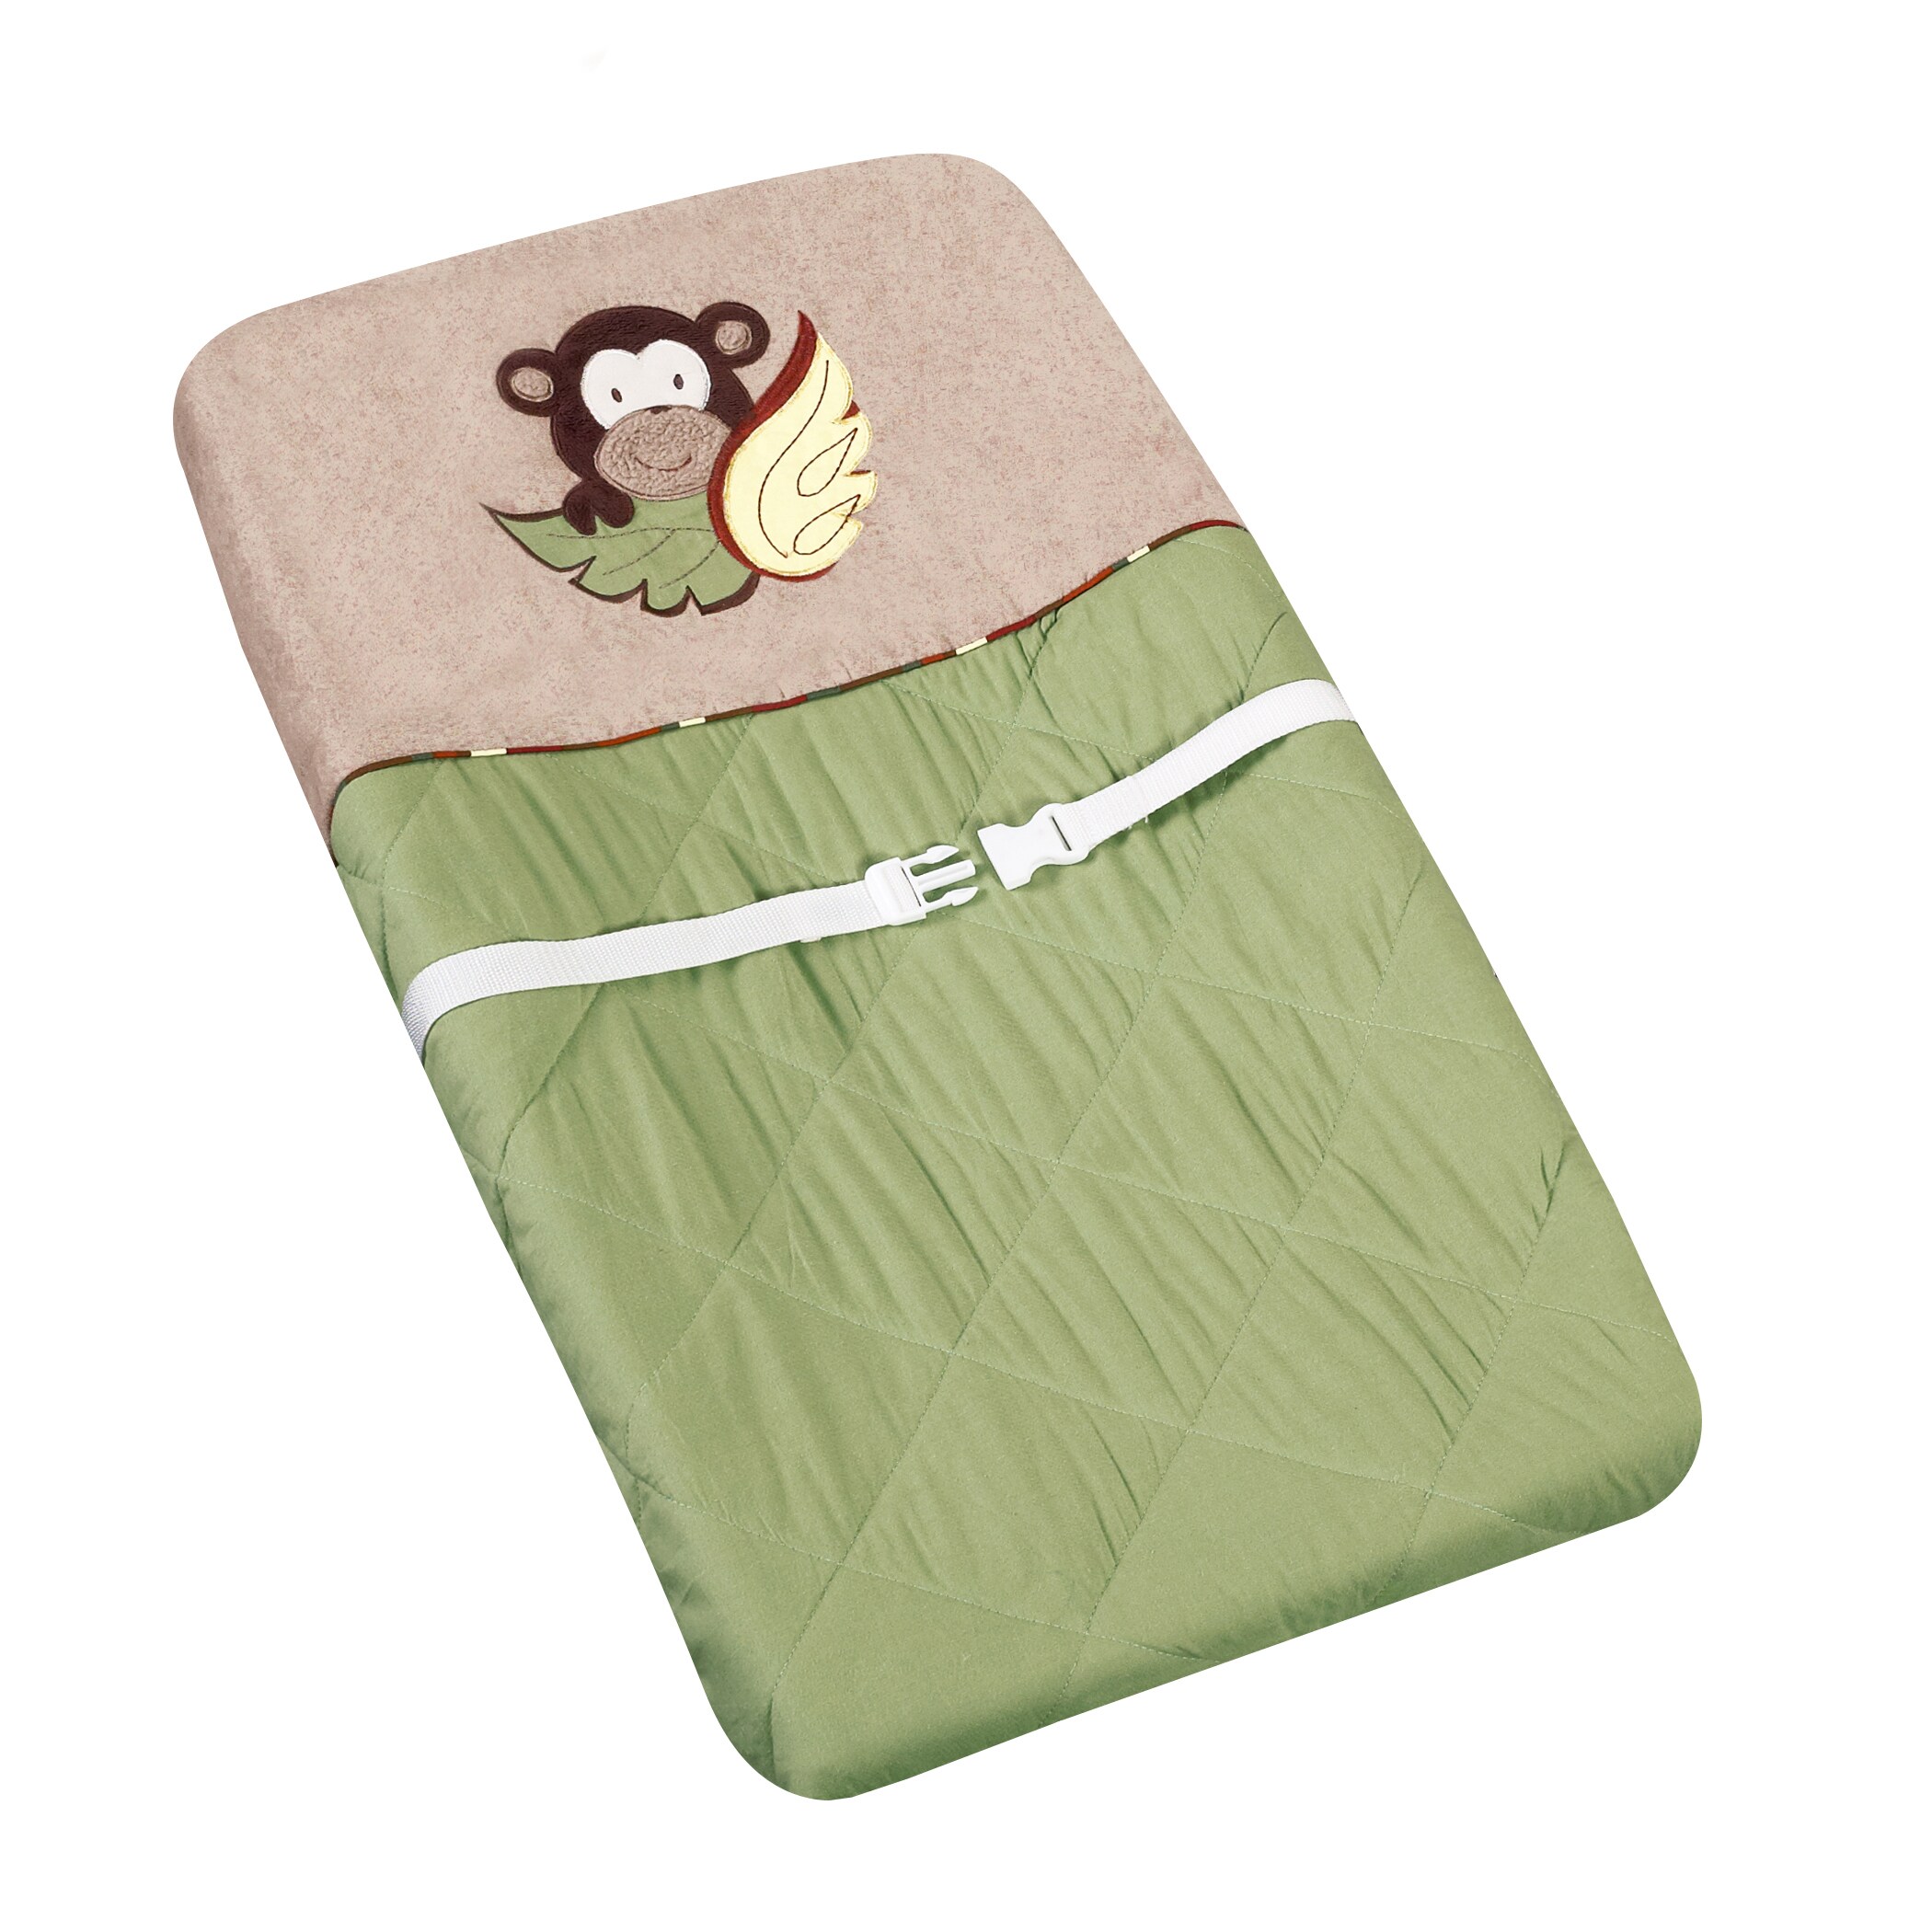 Sweet Jojo Designs Green Monkey Changing Pad Cover (Cotton/microsuedeDimensions 31 inches high x 17 inches wideCare instructions Machine washable)